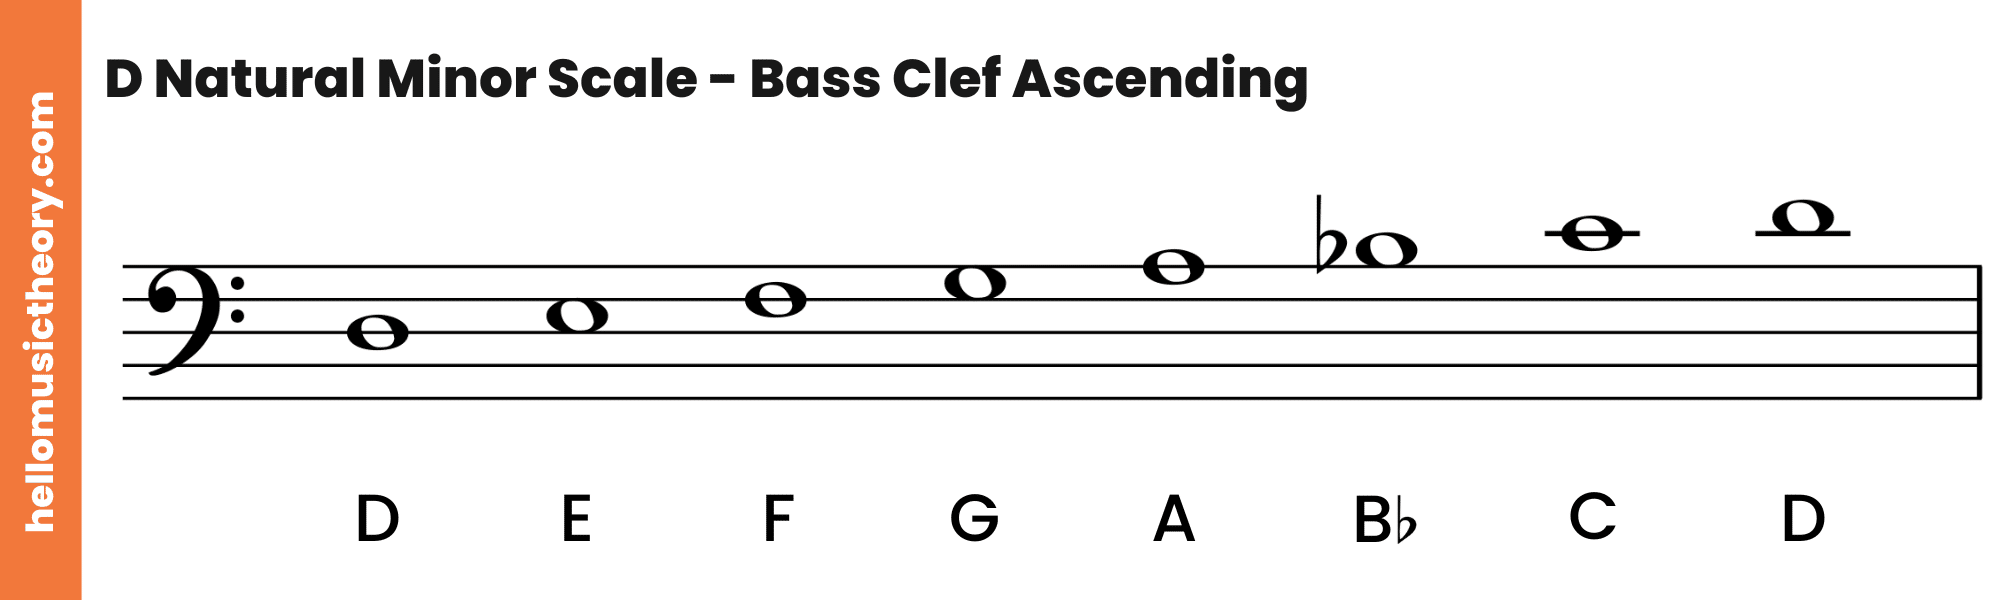 D Natural Minor Scale Bass Clef Ascending